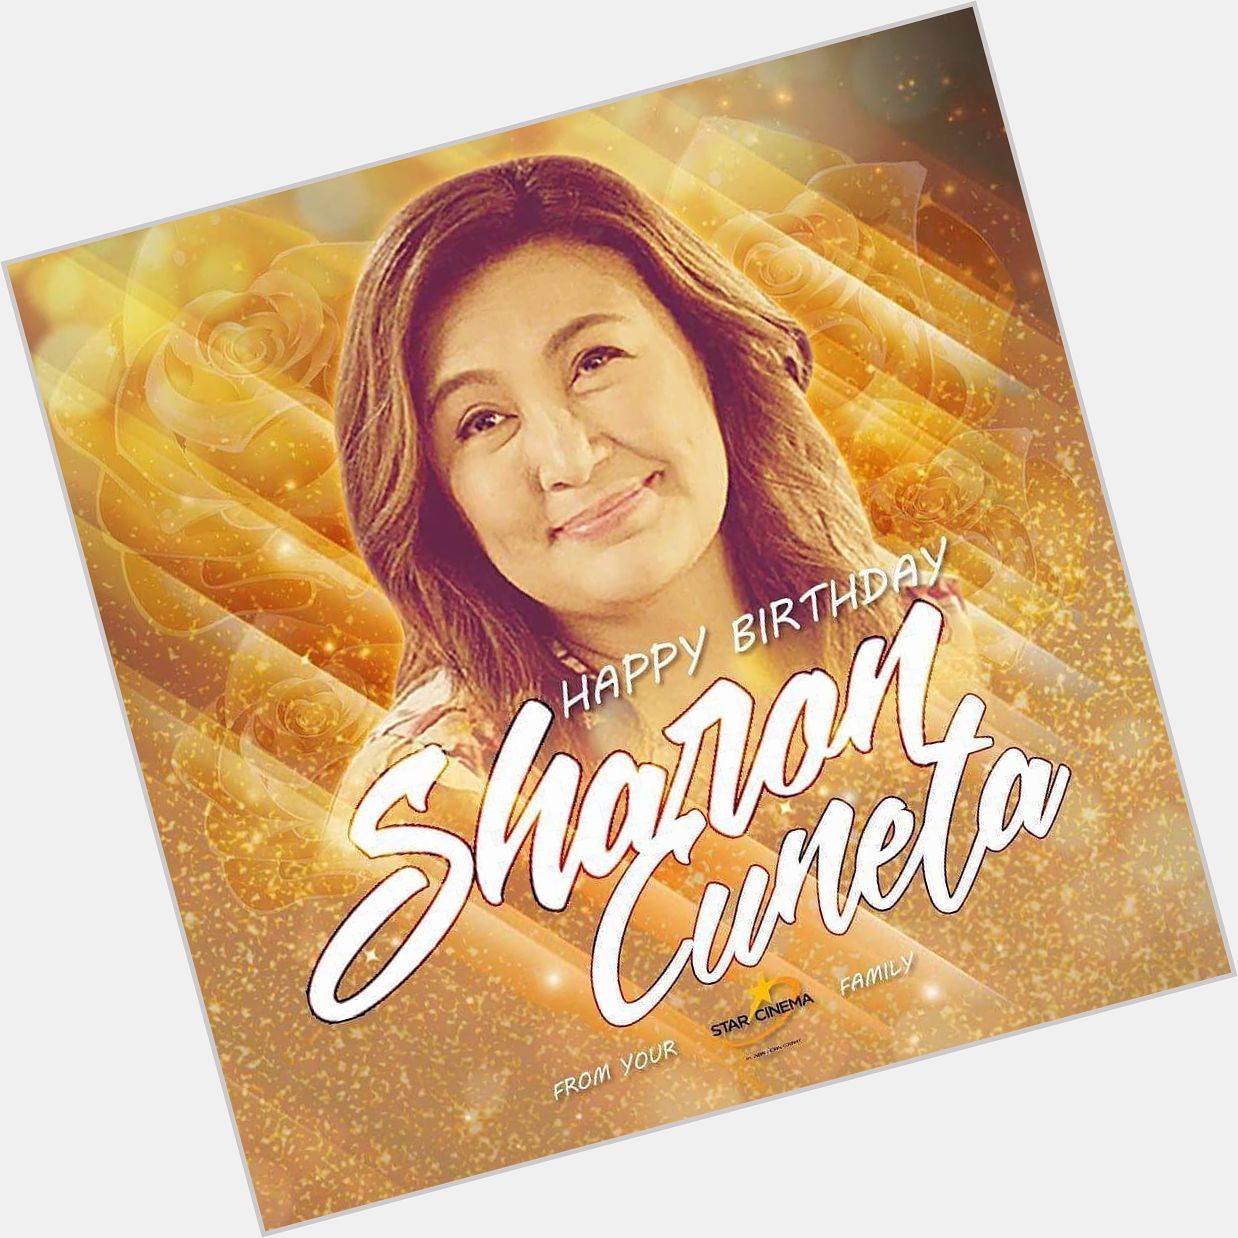 Happy happy birthday to the one and only Megastar Sharon Cuneta! Love, your Star Cinema family 